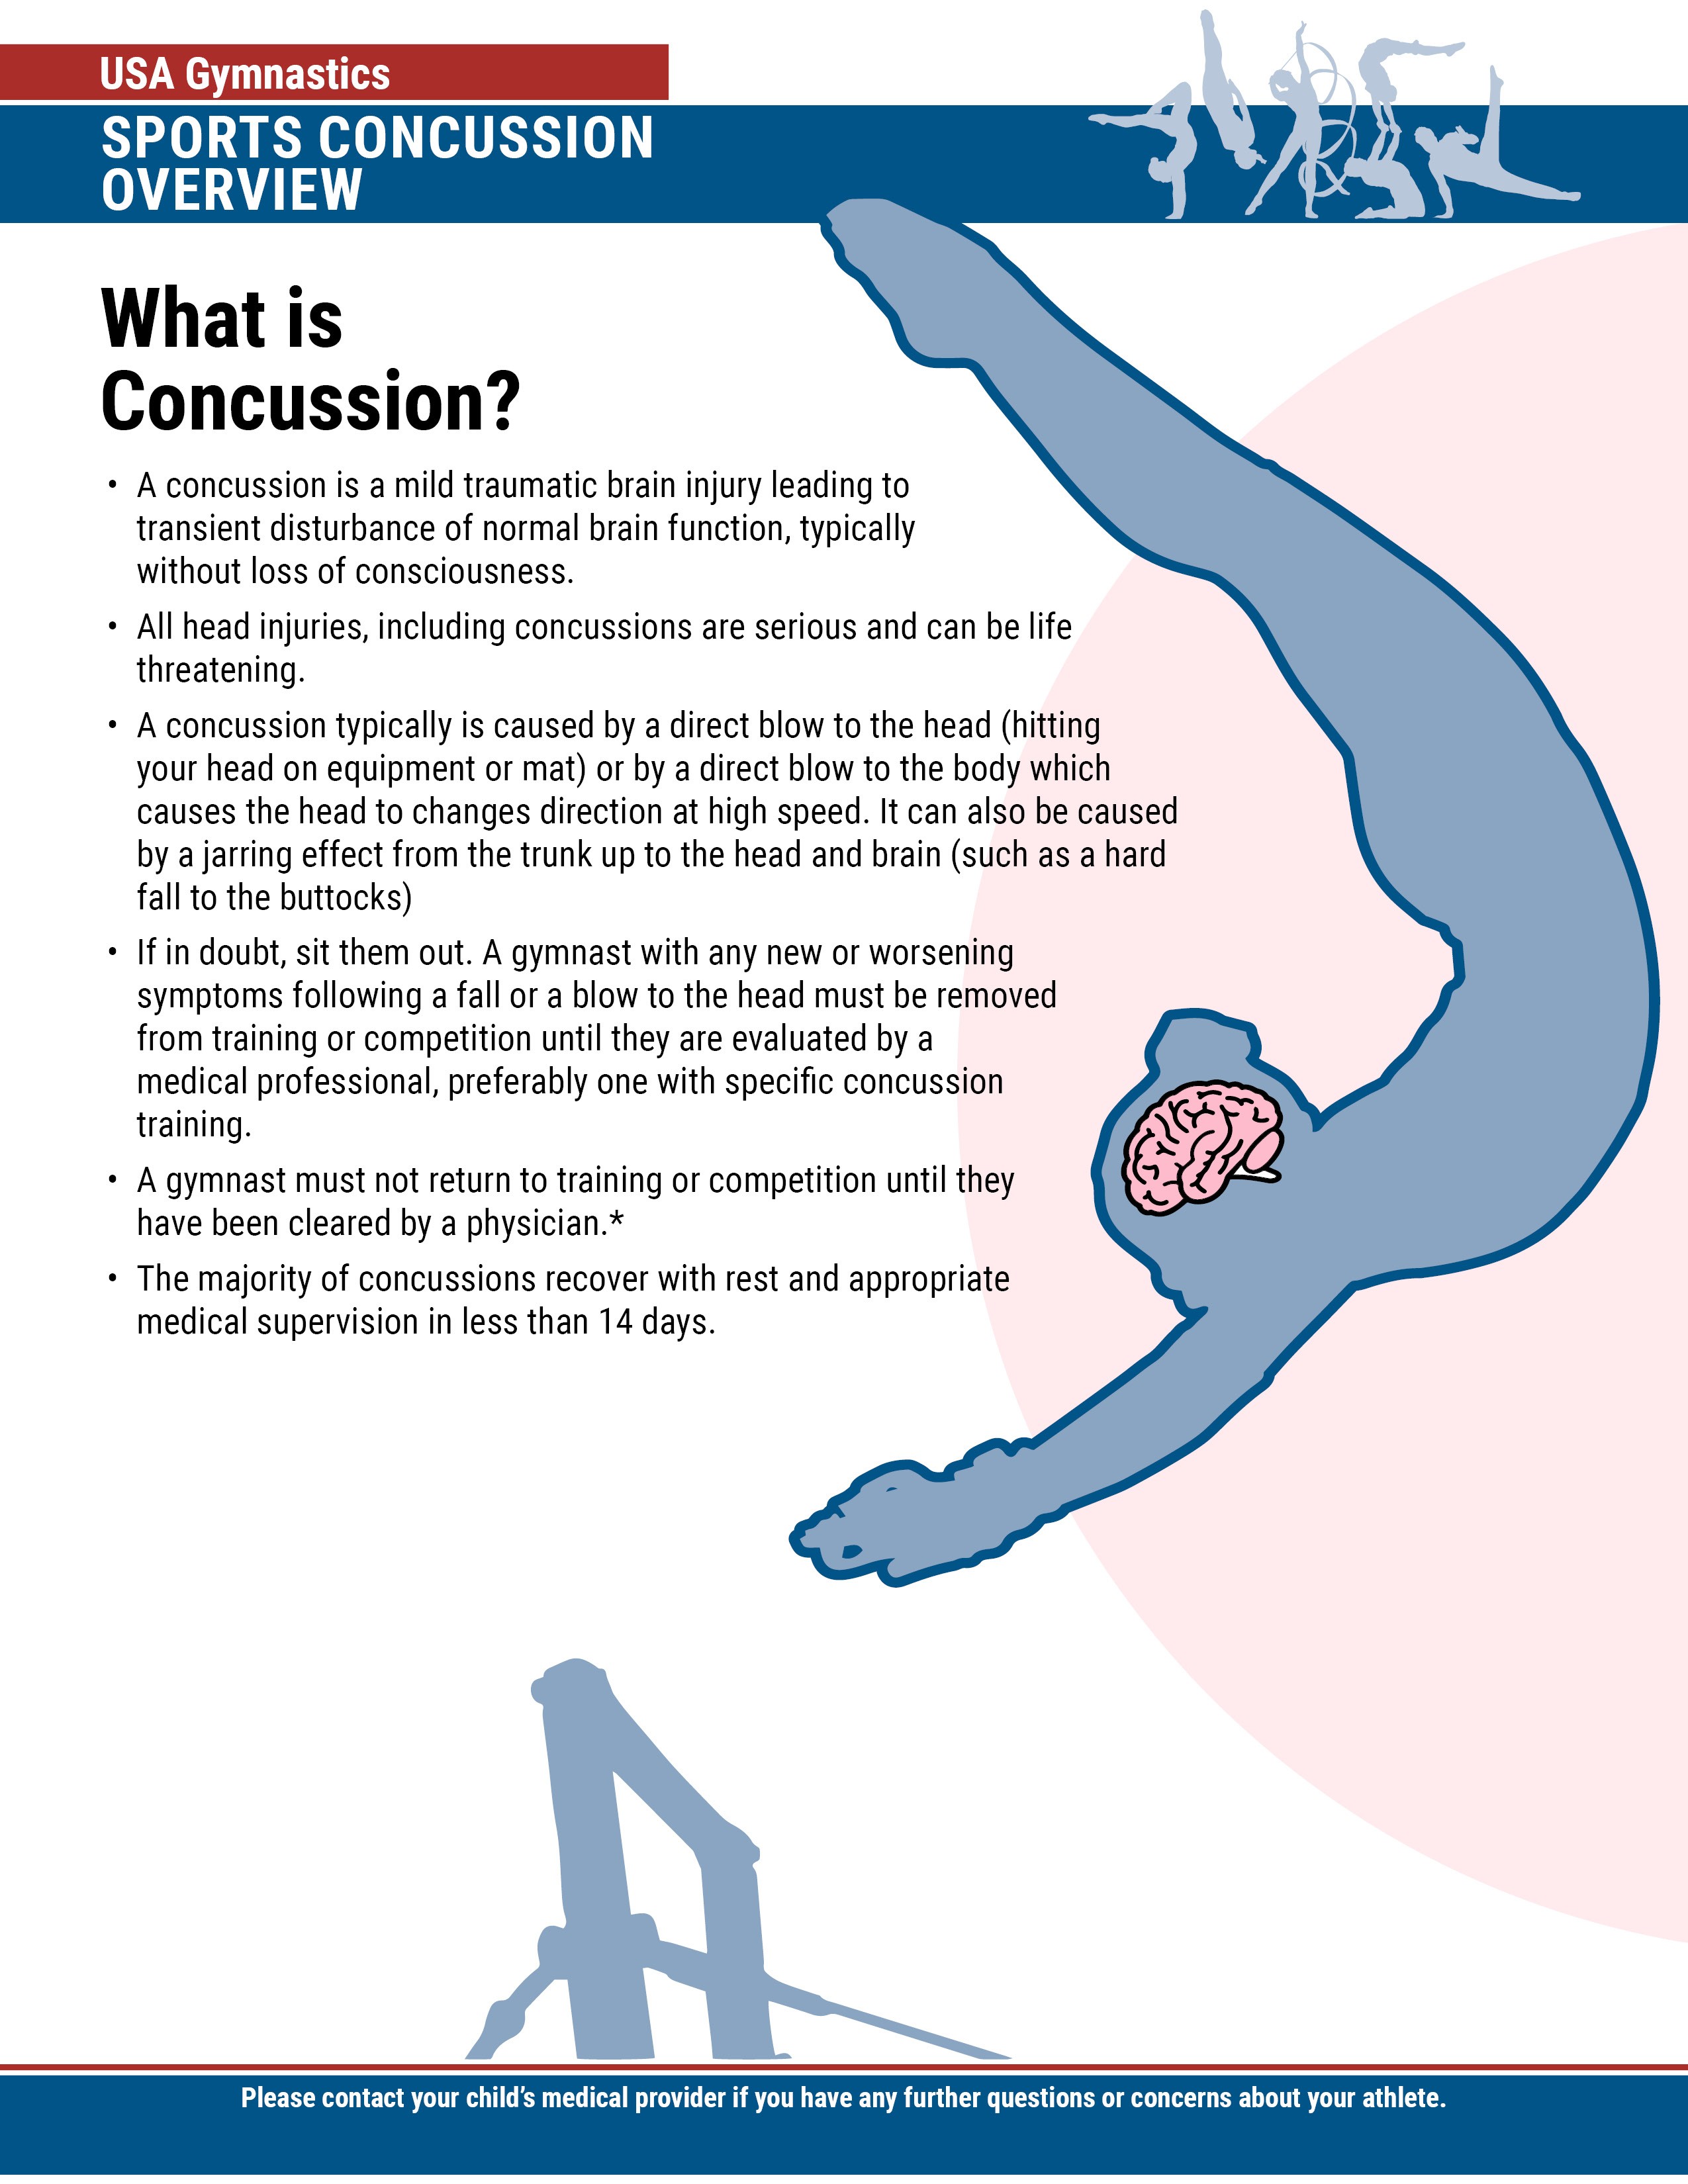 USAG Concussion Overview